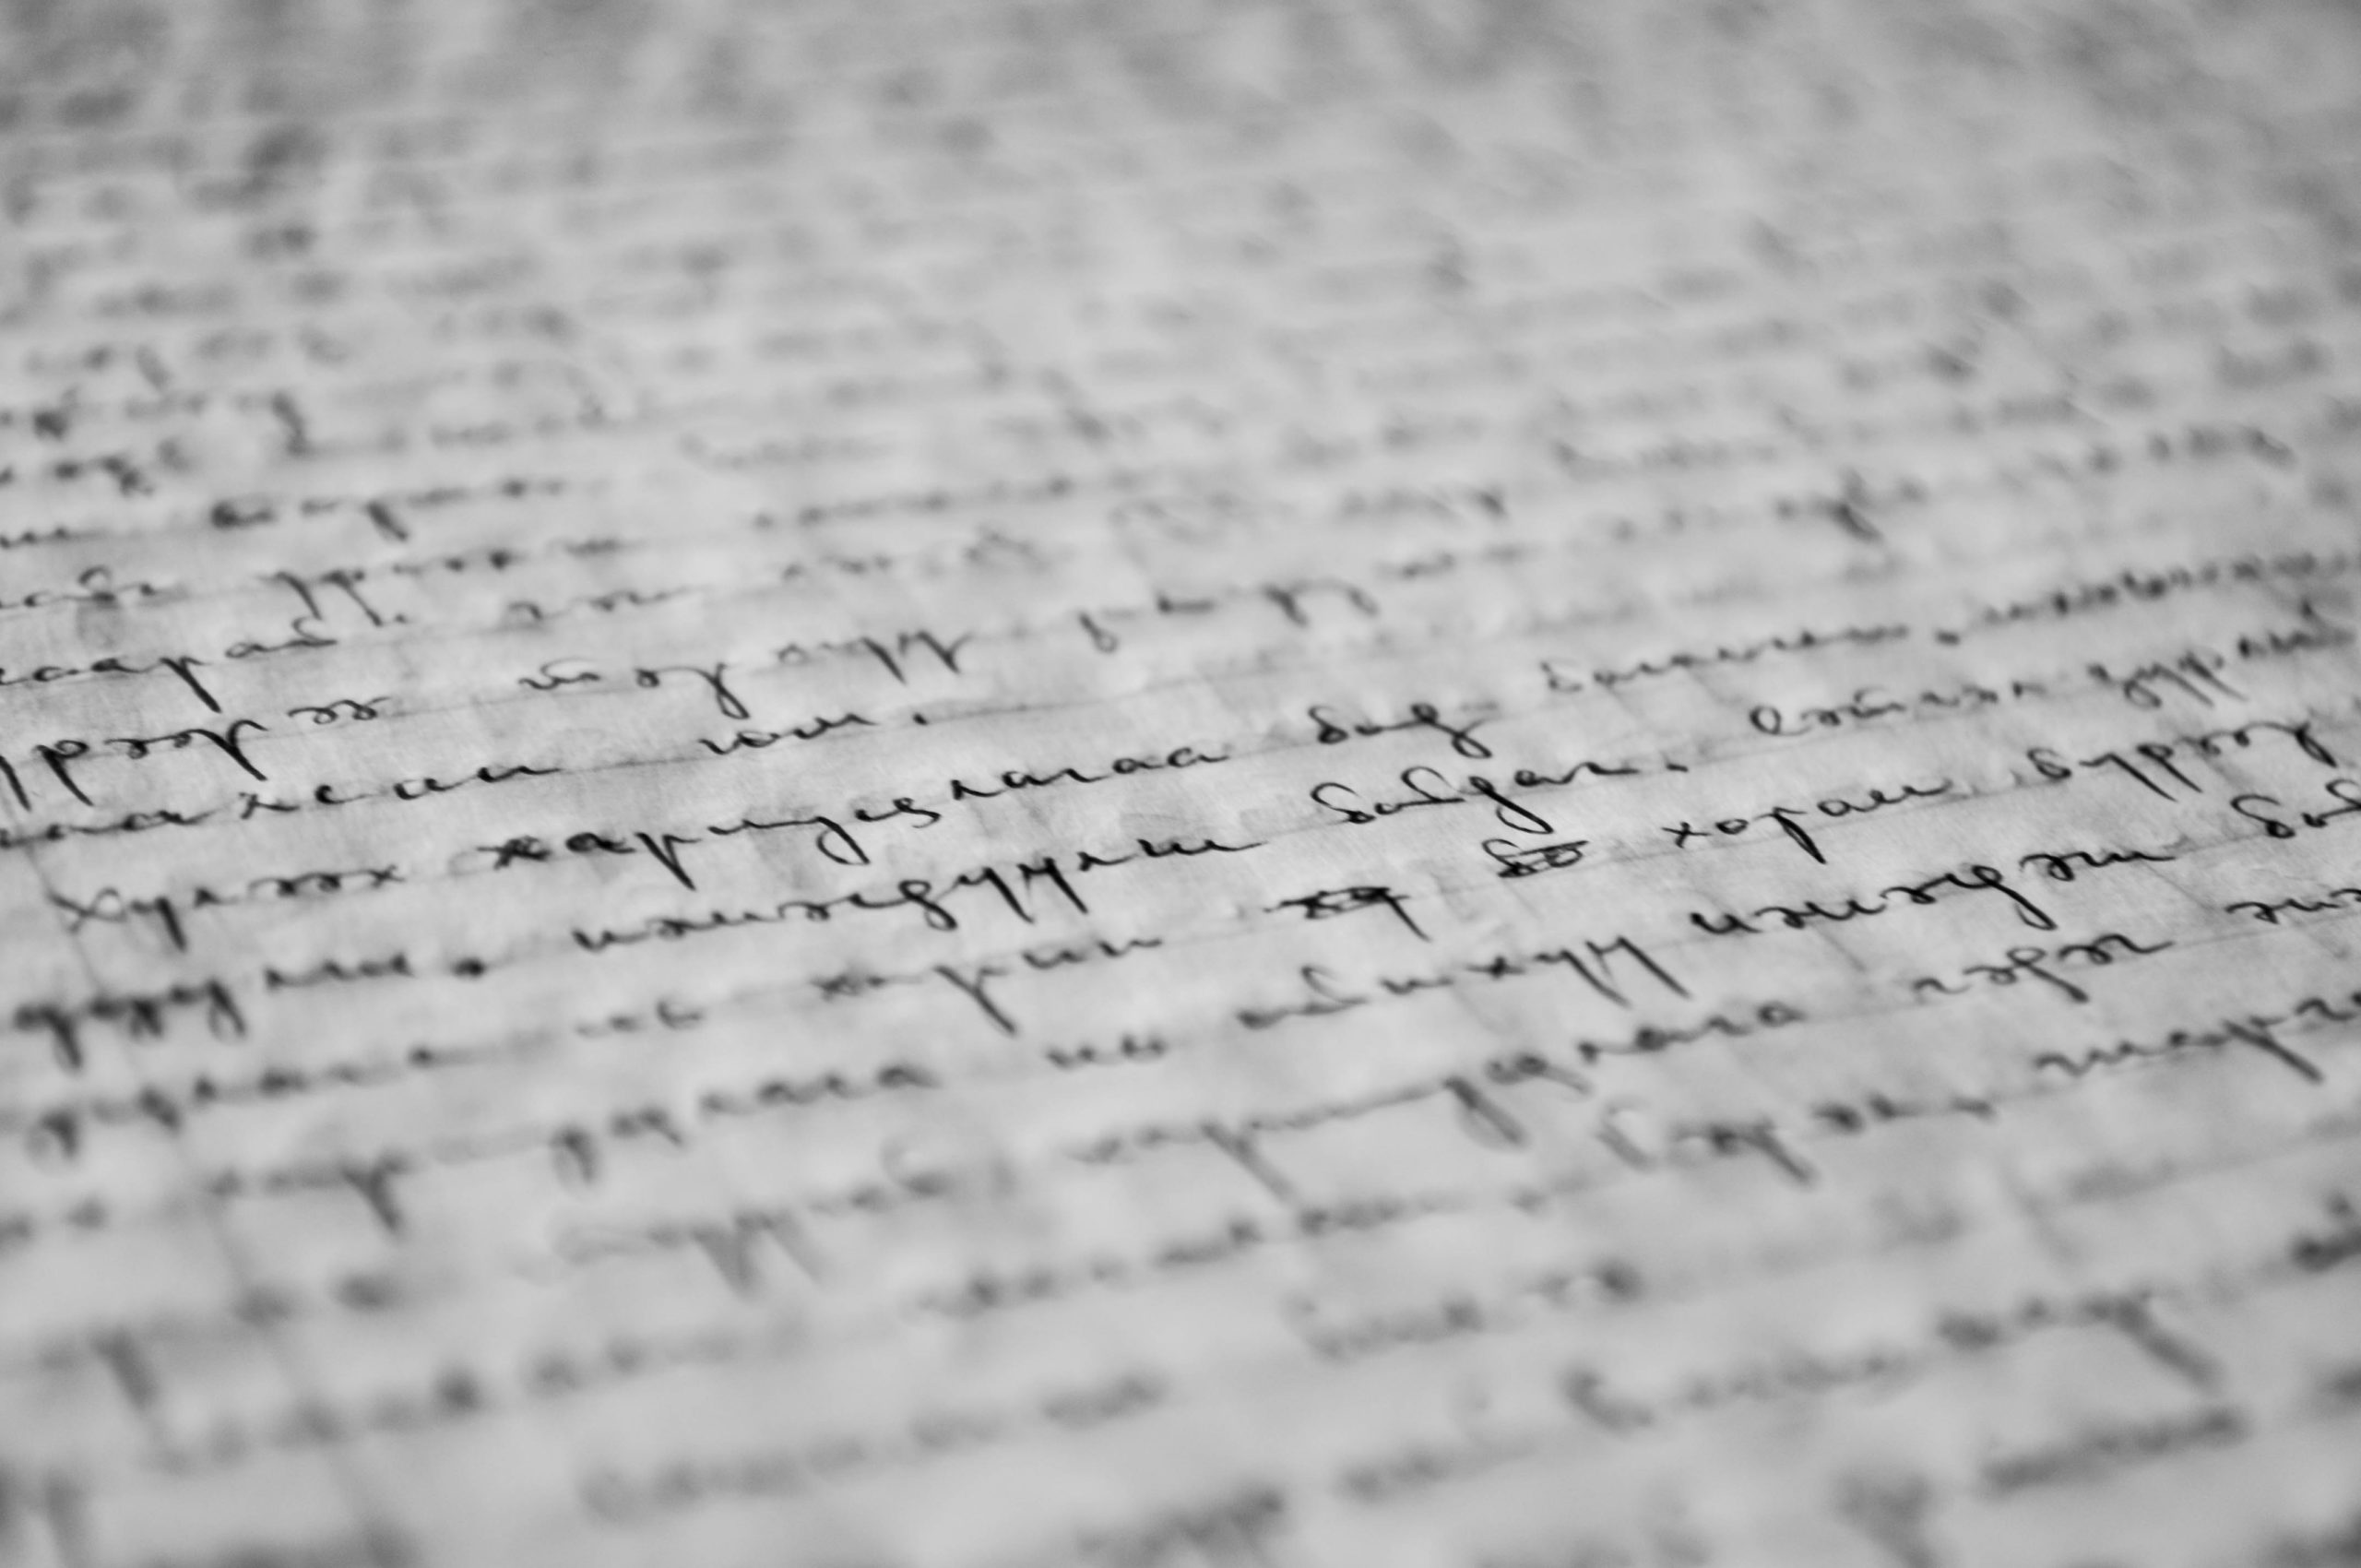 Is handwriting analysis admissible in court?